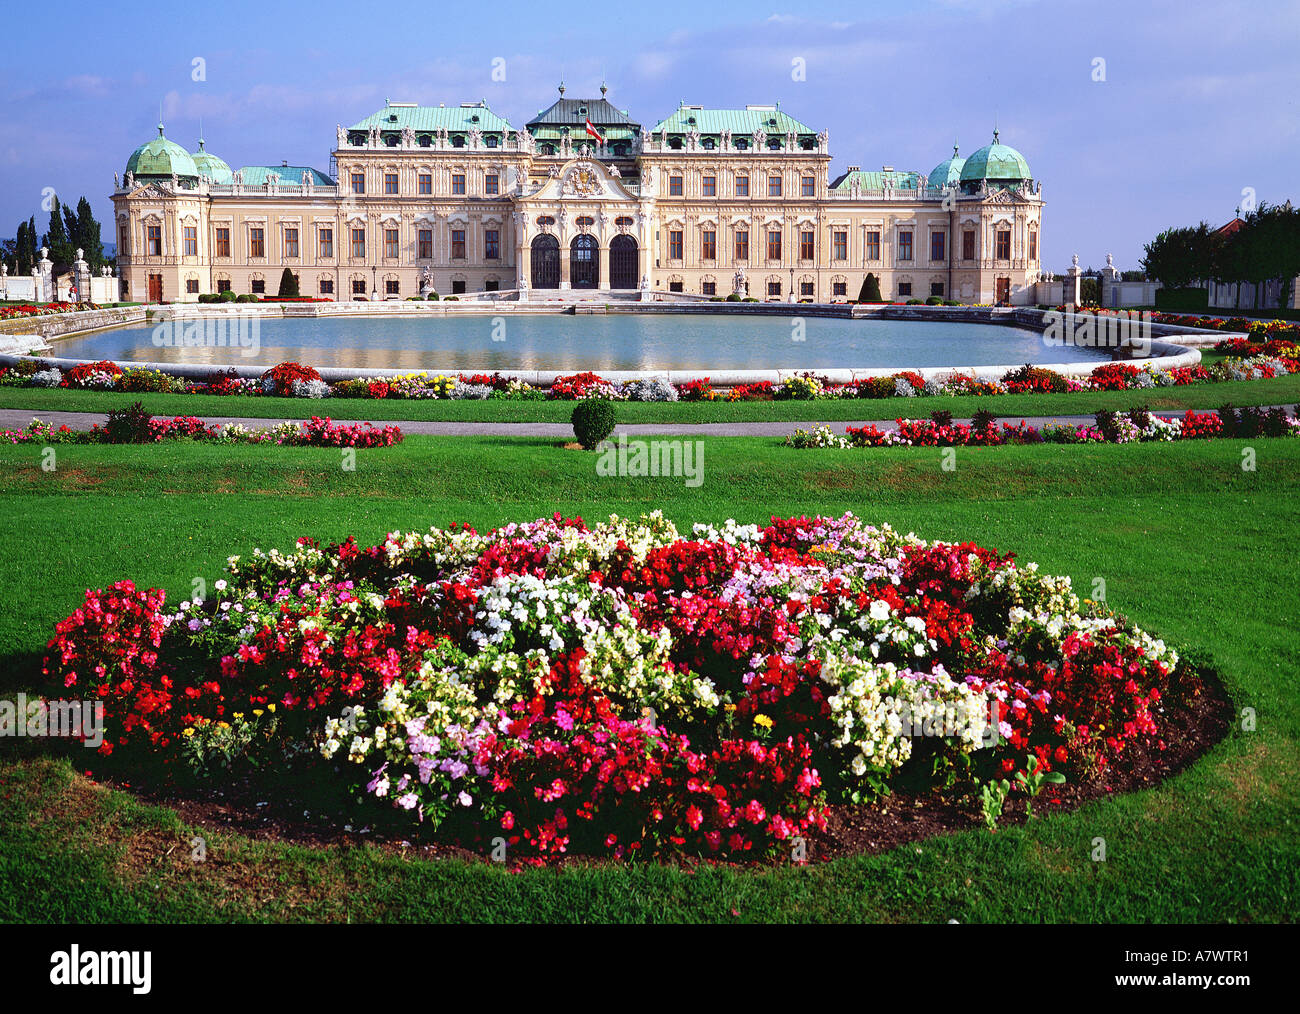 Austria, Vienna, the Belvedere Palace (exhibition room for painters like G. Kimt and E. SChiele) Stock Photo